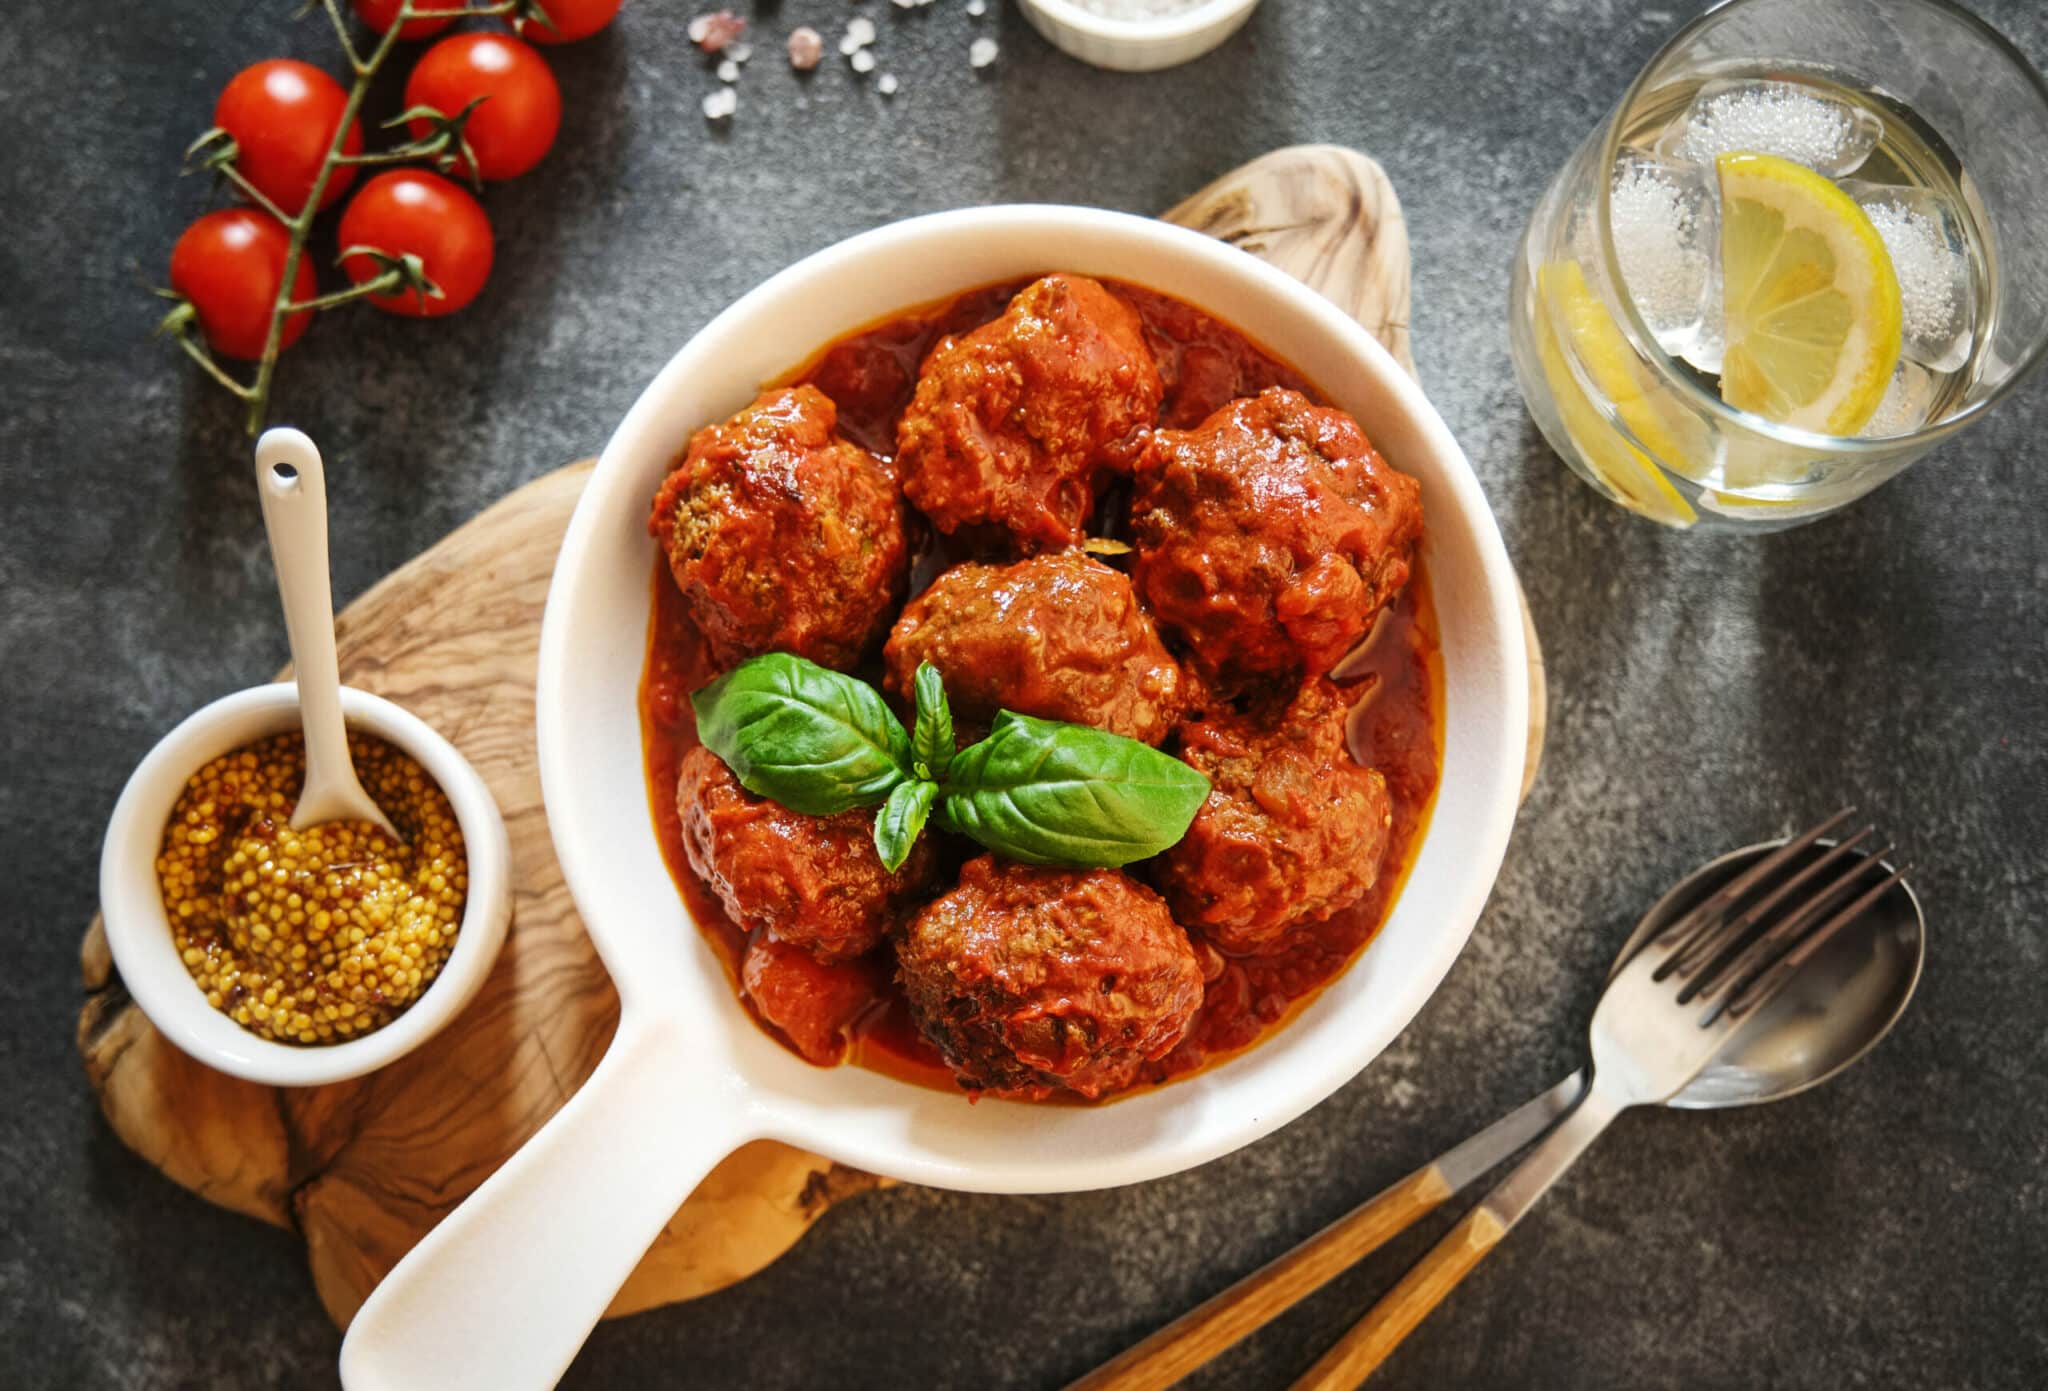 How Long Do Meatballs Take To Cook?